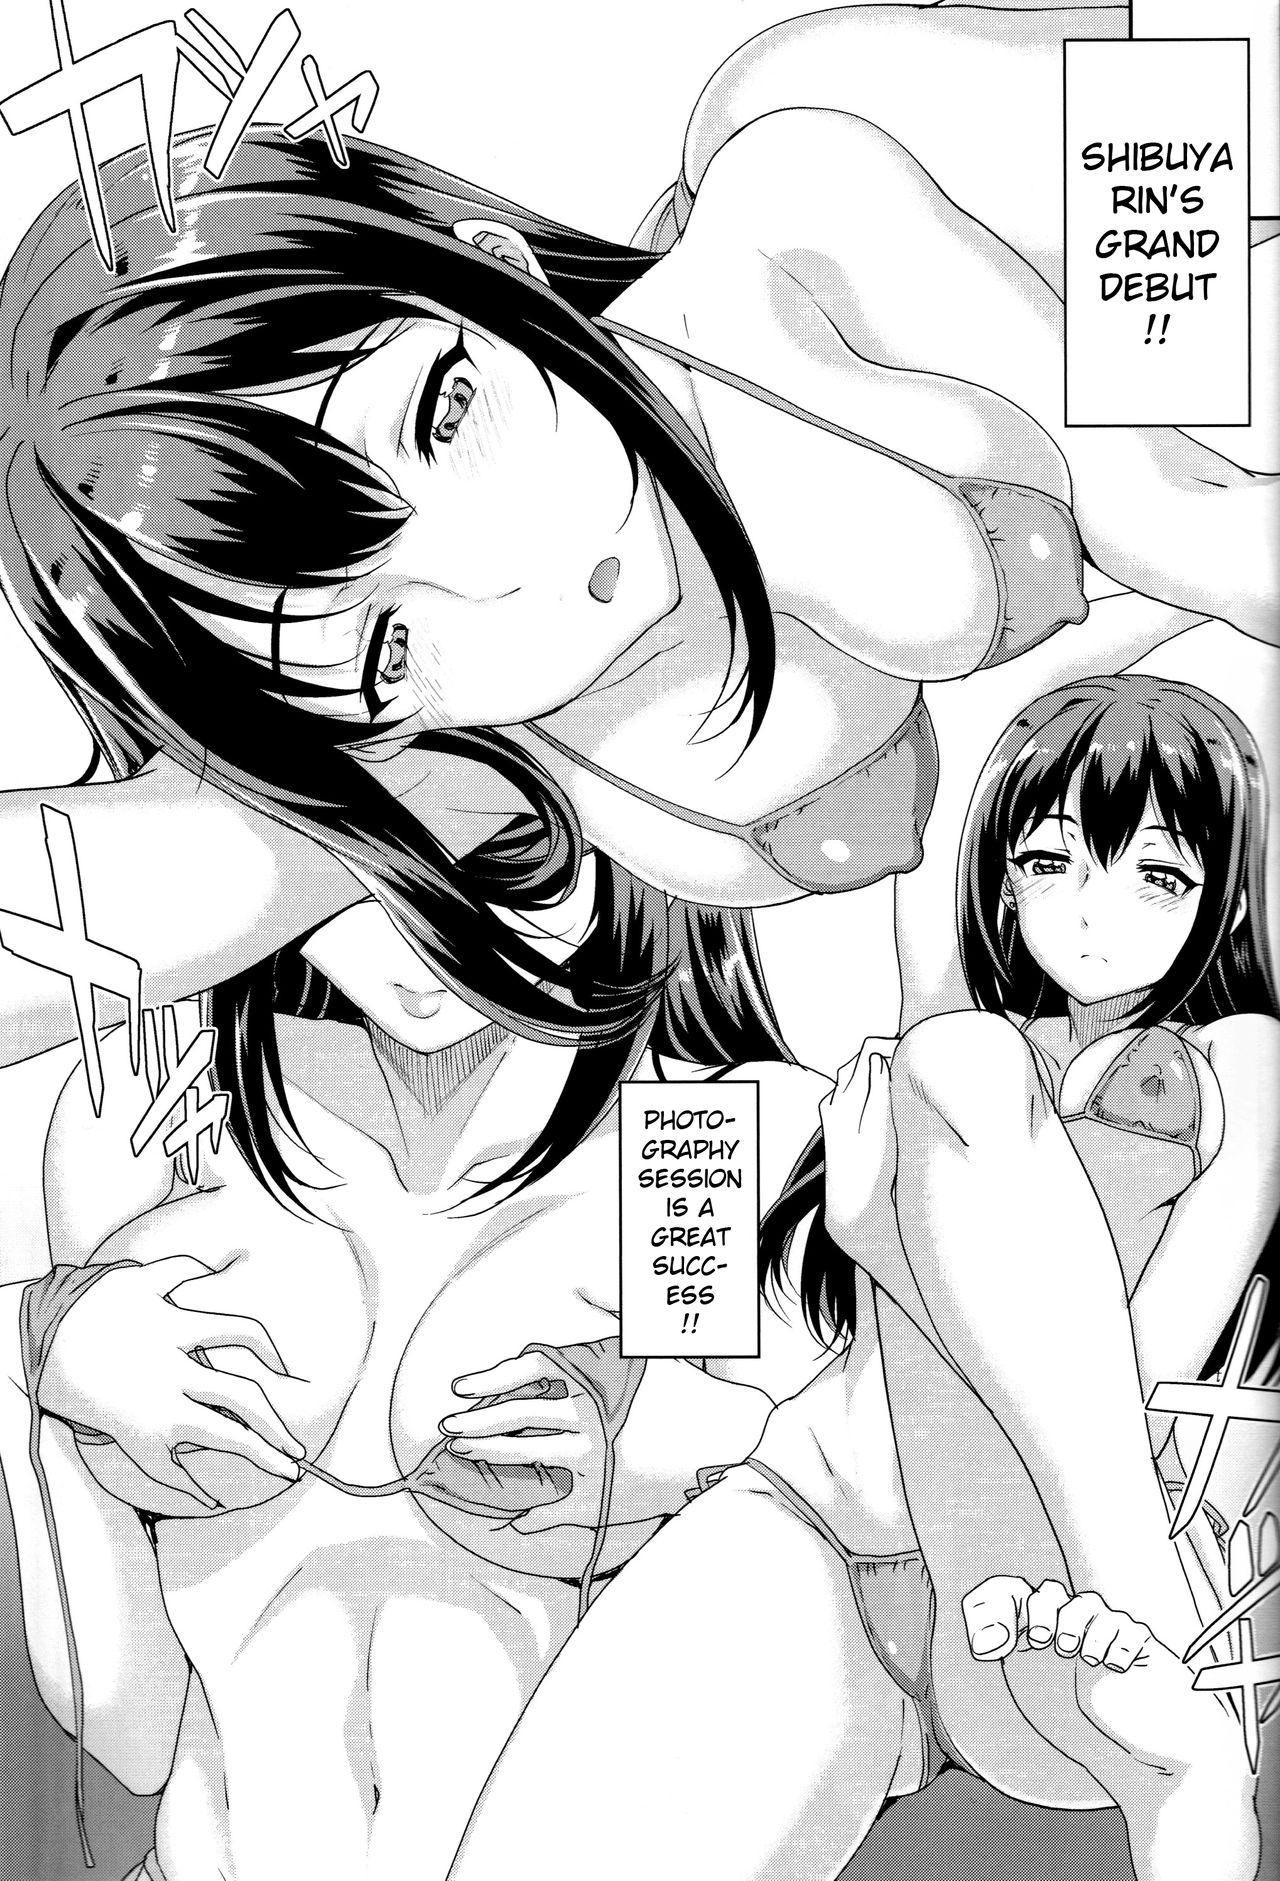 Party Kayumidome 15 Houme - The idolmaster Indoor - Page 3